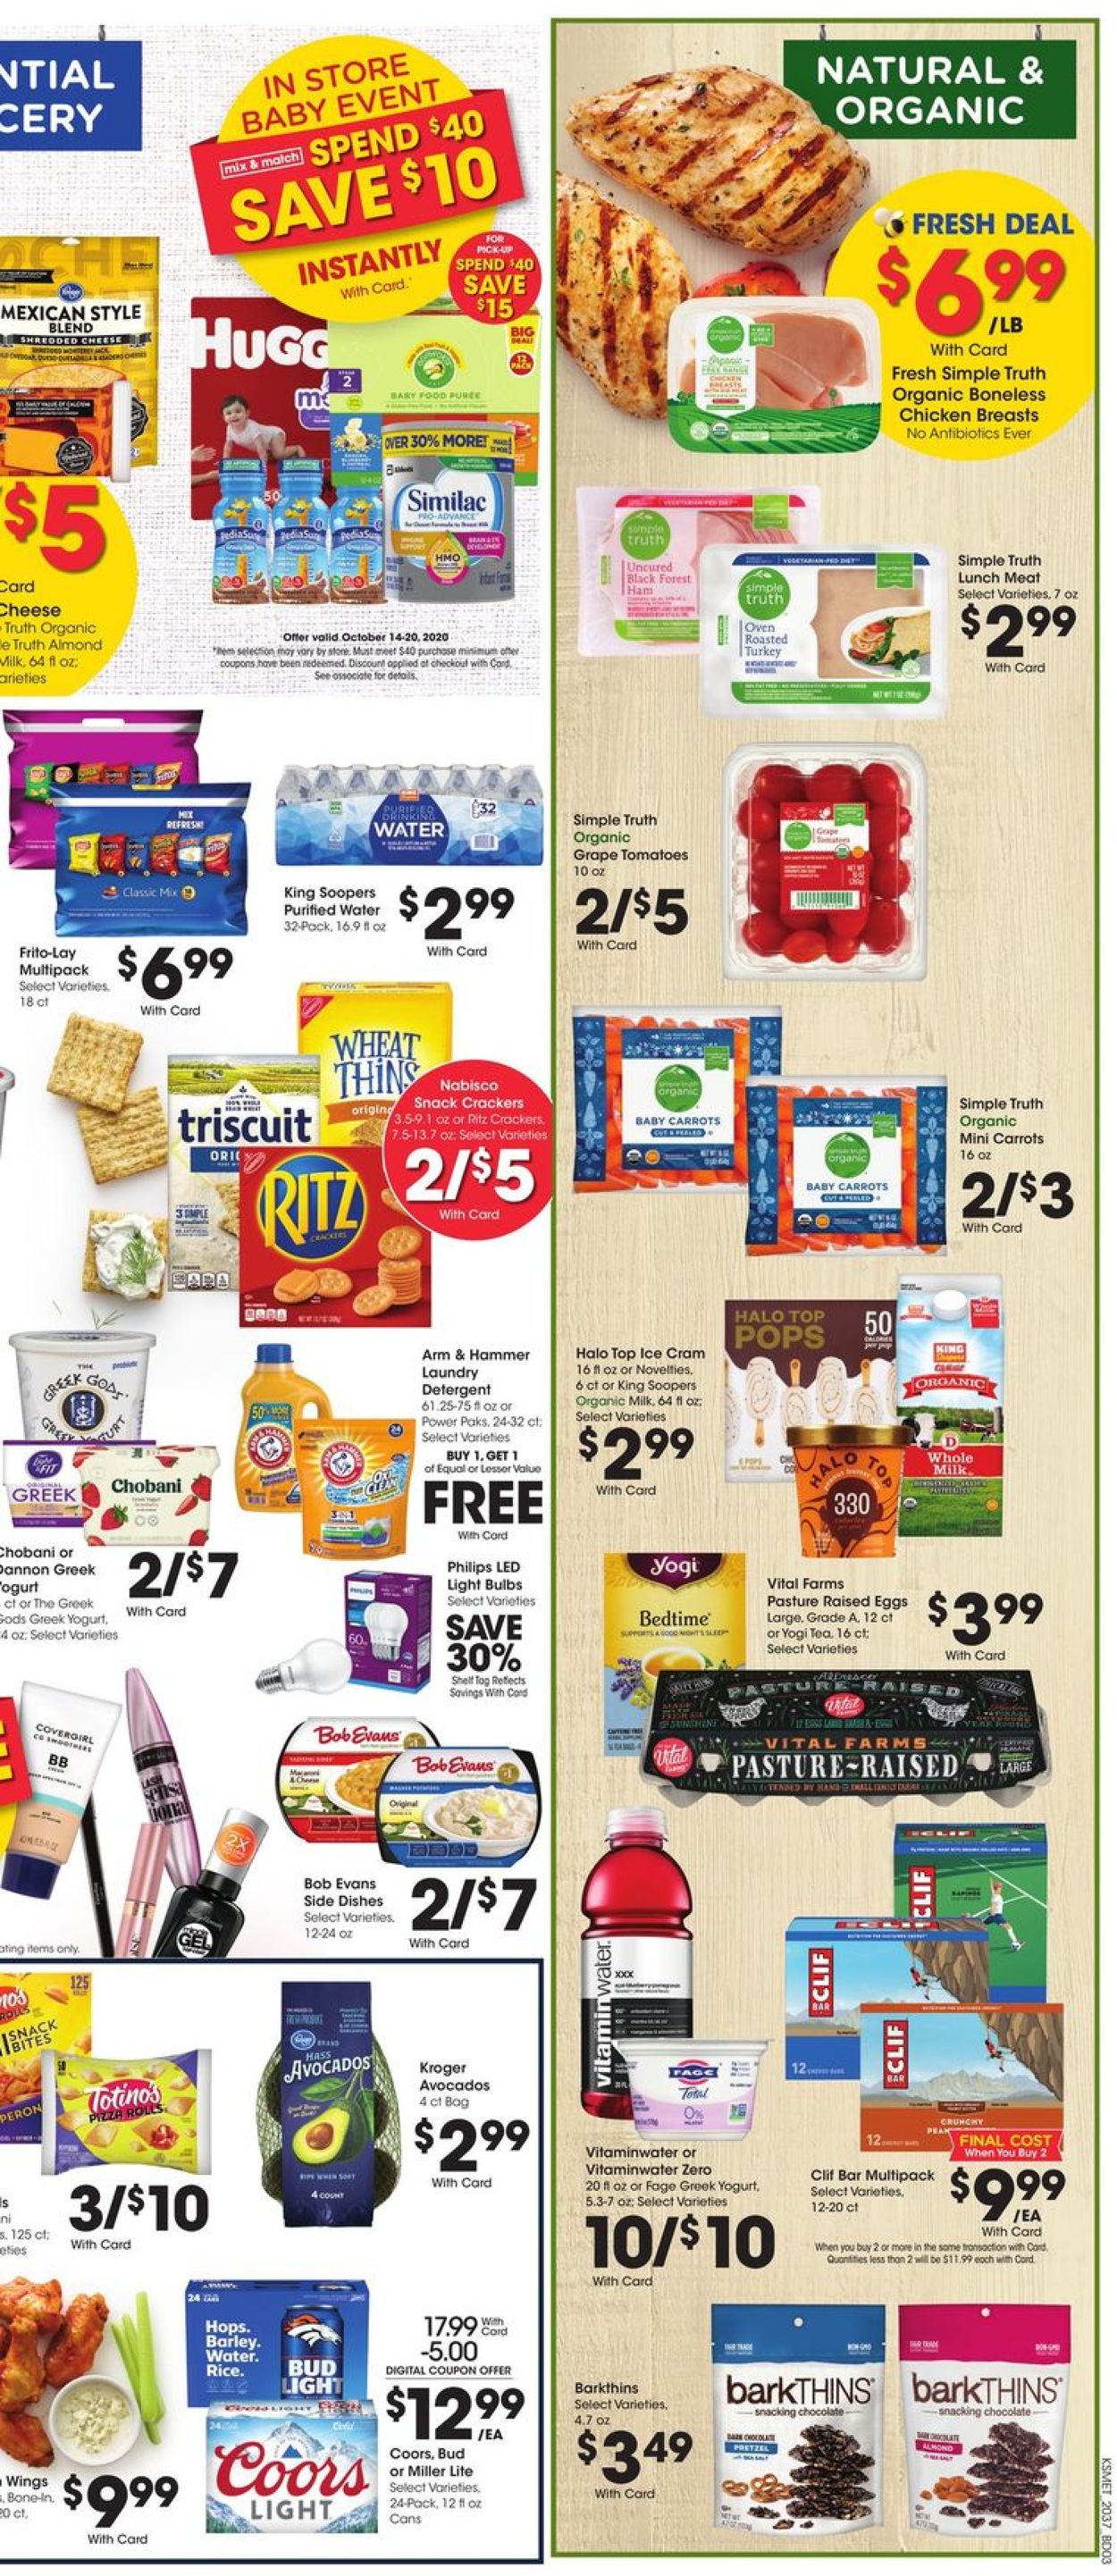 King Soopers Ad from 10/14/2020